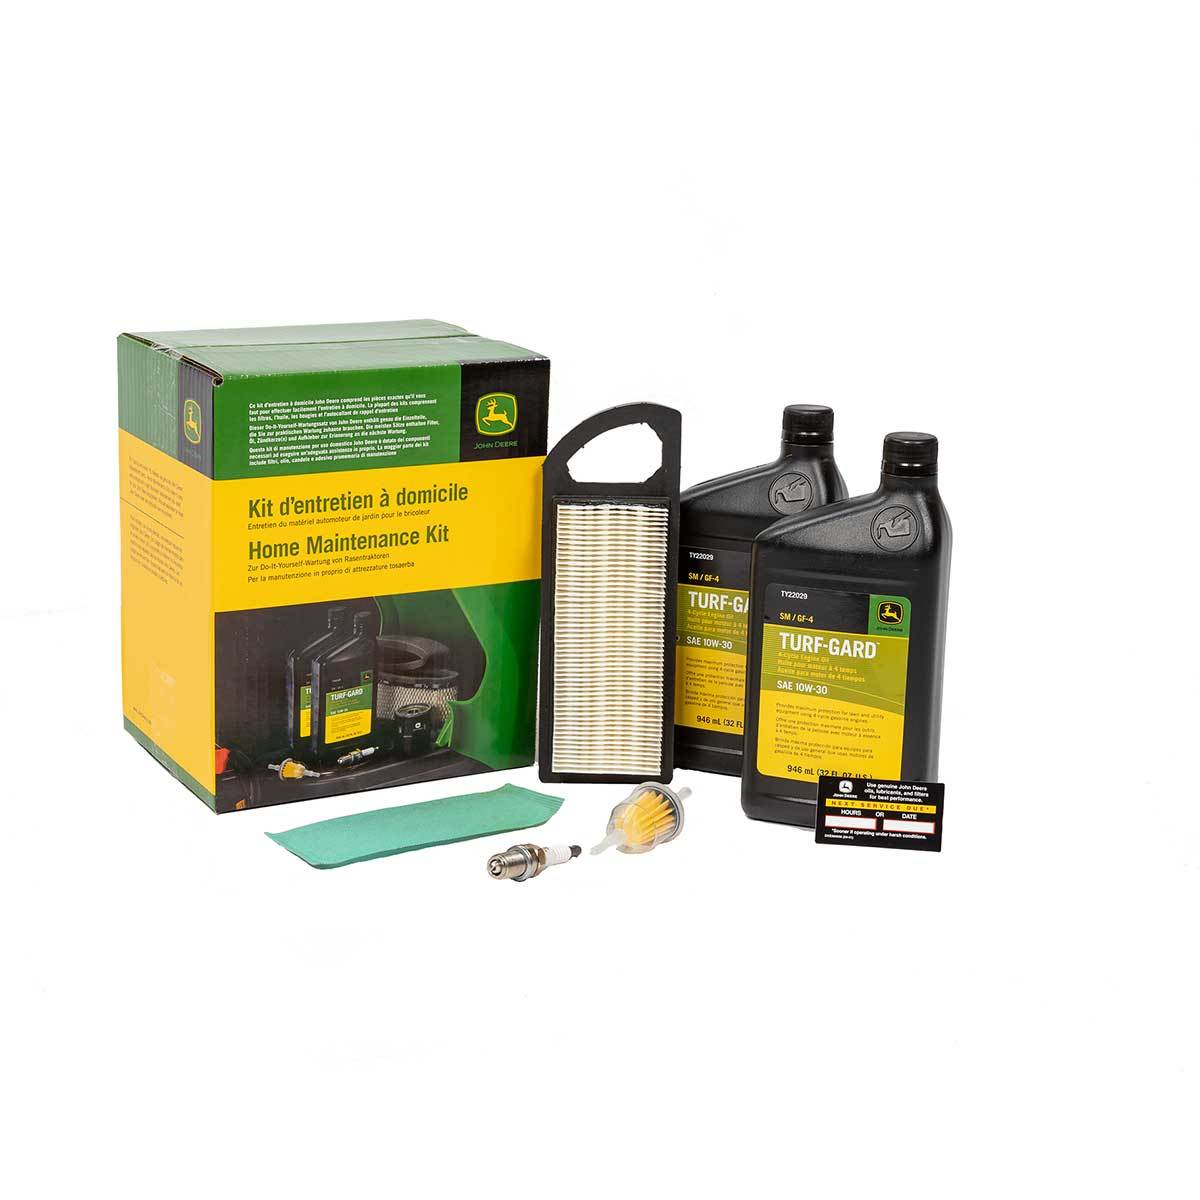 Home Maintenance Kit For 100, L, and Z Series